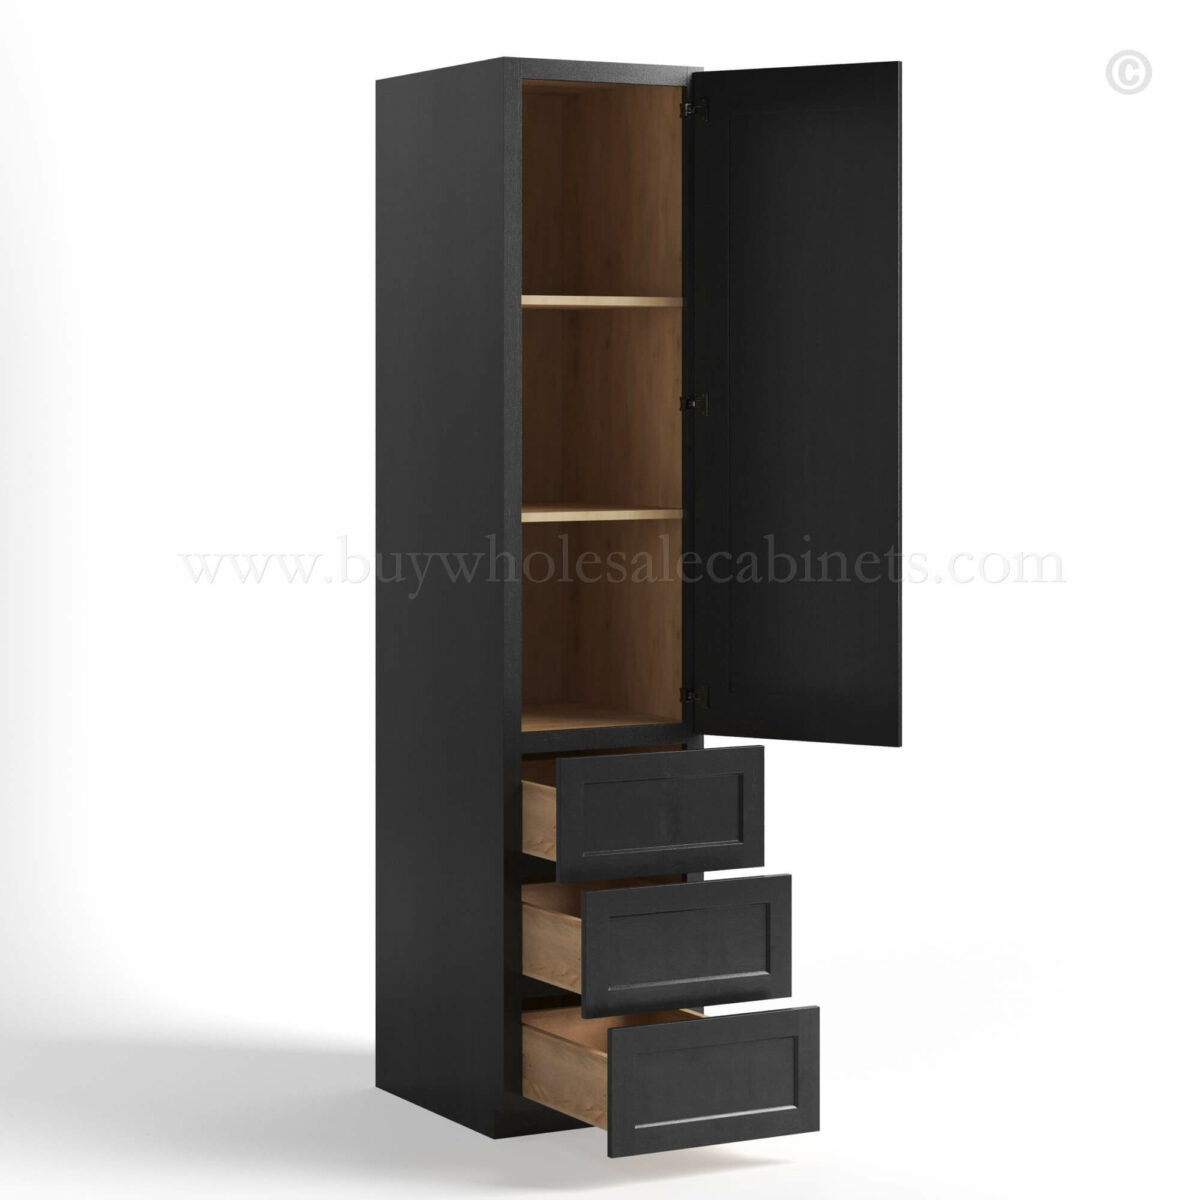 charcoal black shaker vanity linen cabinet with three drawer and single door, rta cabinets, wholesale cabinets